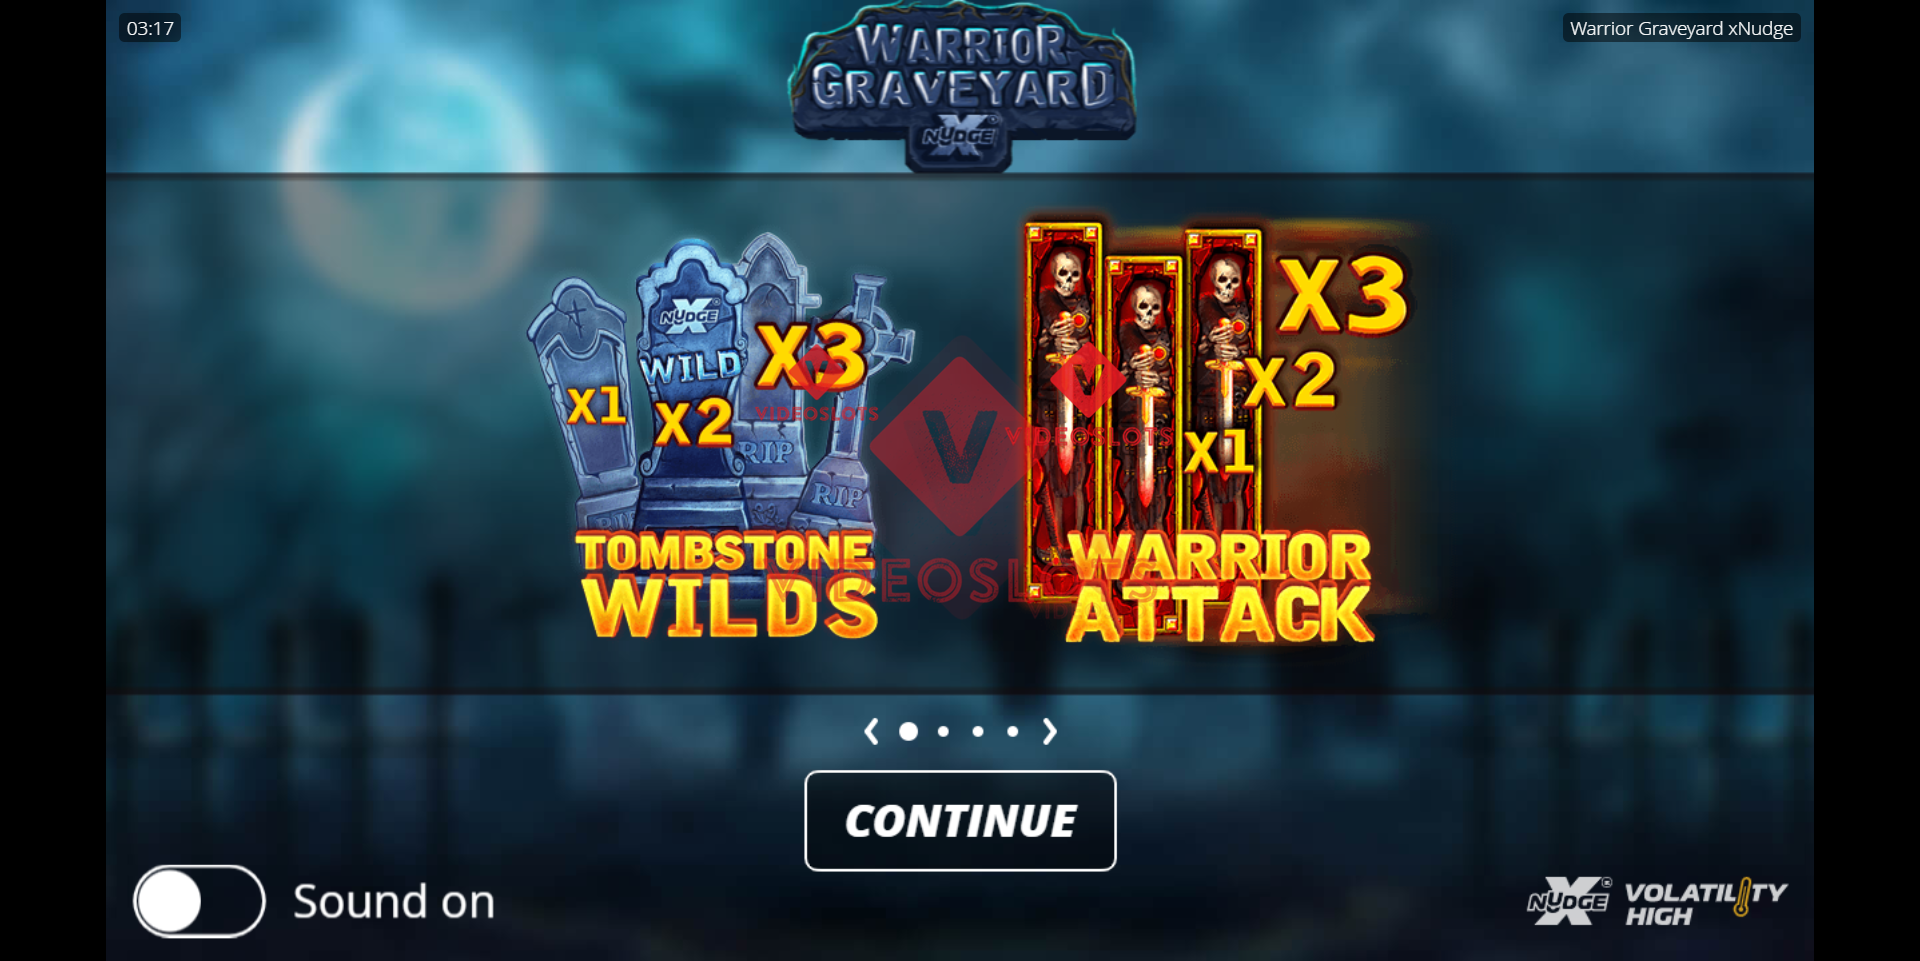 Game Intro for Warrior Graveyard xNudge slot from NoLimit City